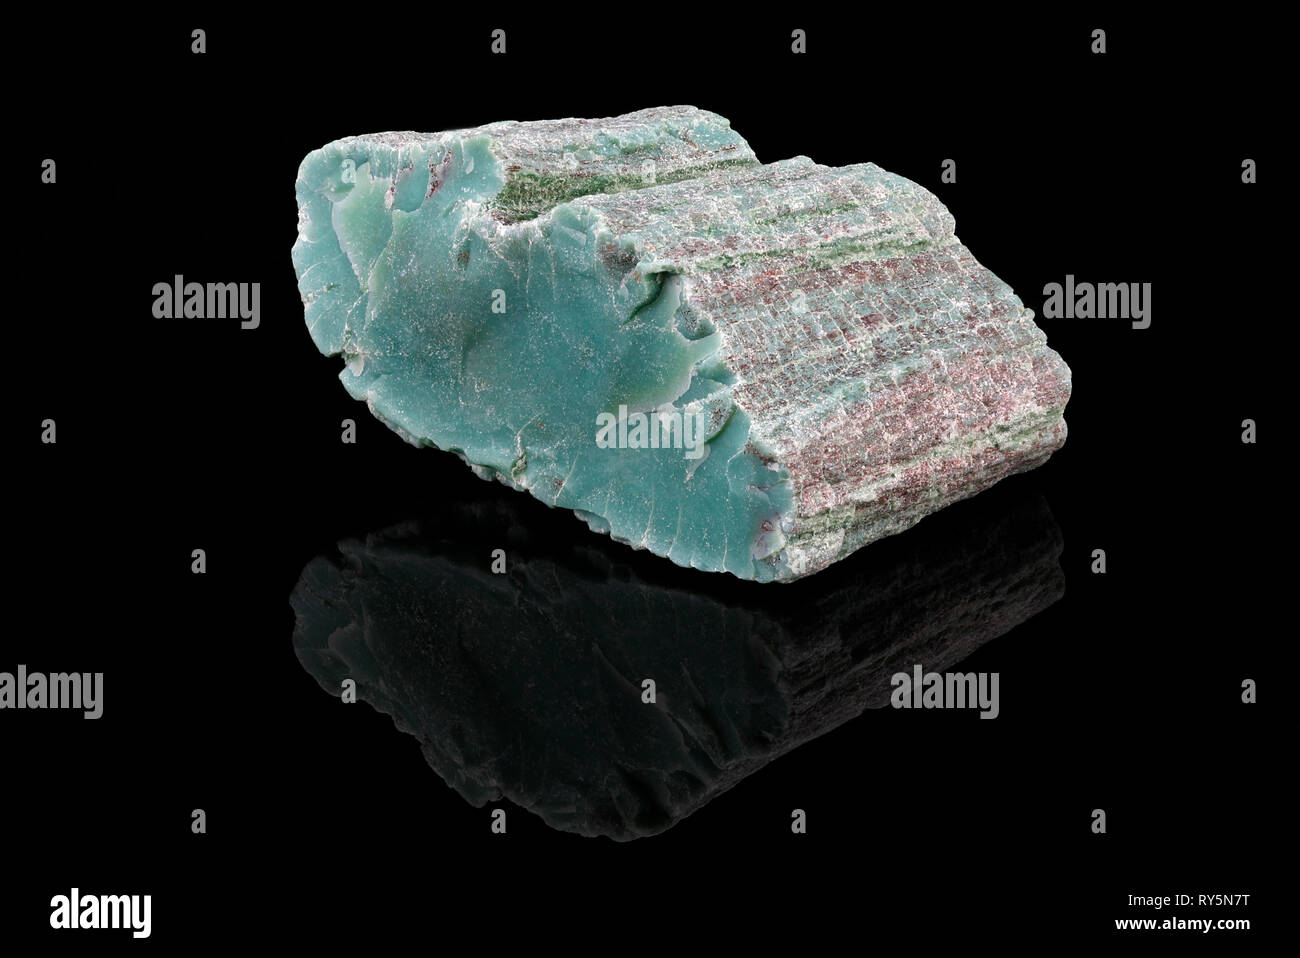 Chromium Petrified Tree Wood (Conifer-Araucarioxylon Arizonicum), The wood has been replaced with mineralized chromium, giving it its green color. It  Stock Photo